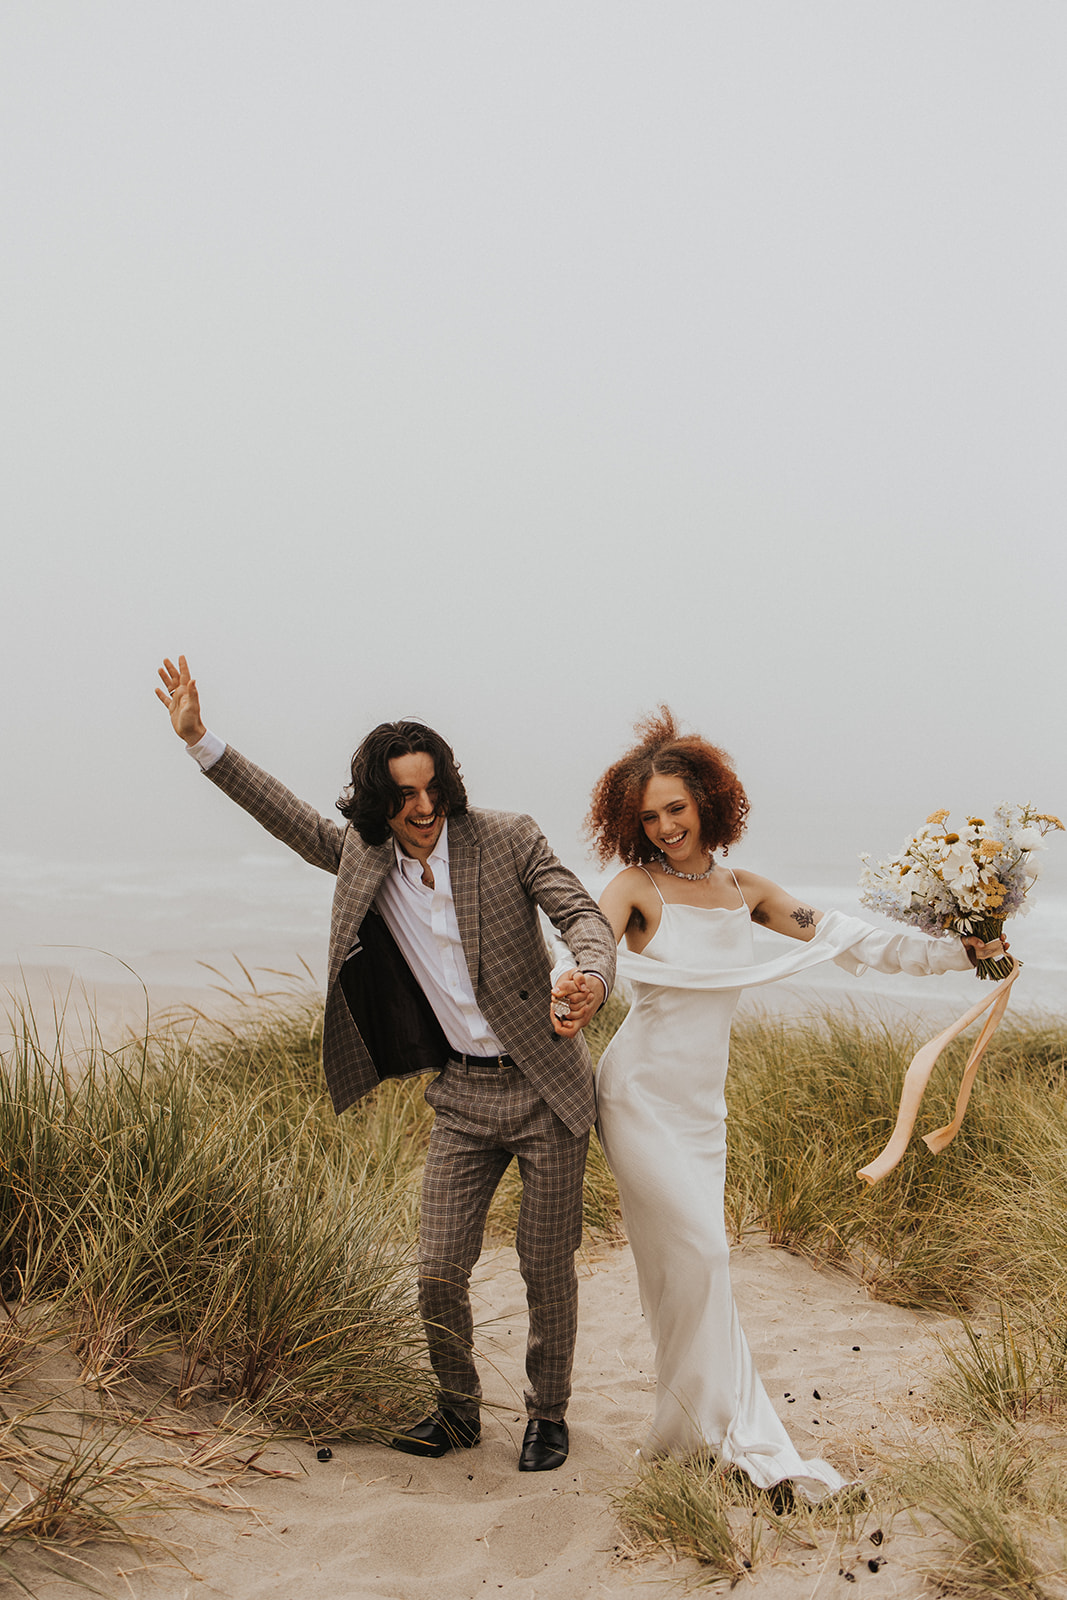 What Is Eloping? The Modern Version Of An Elopement